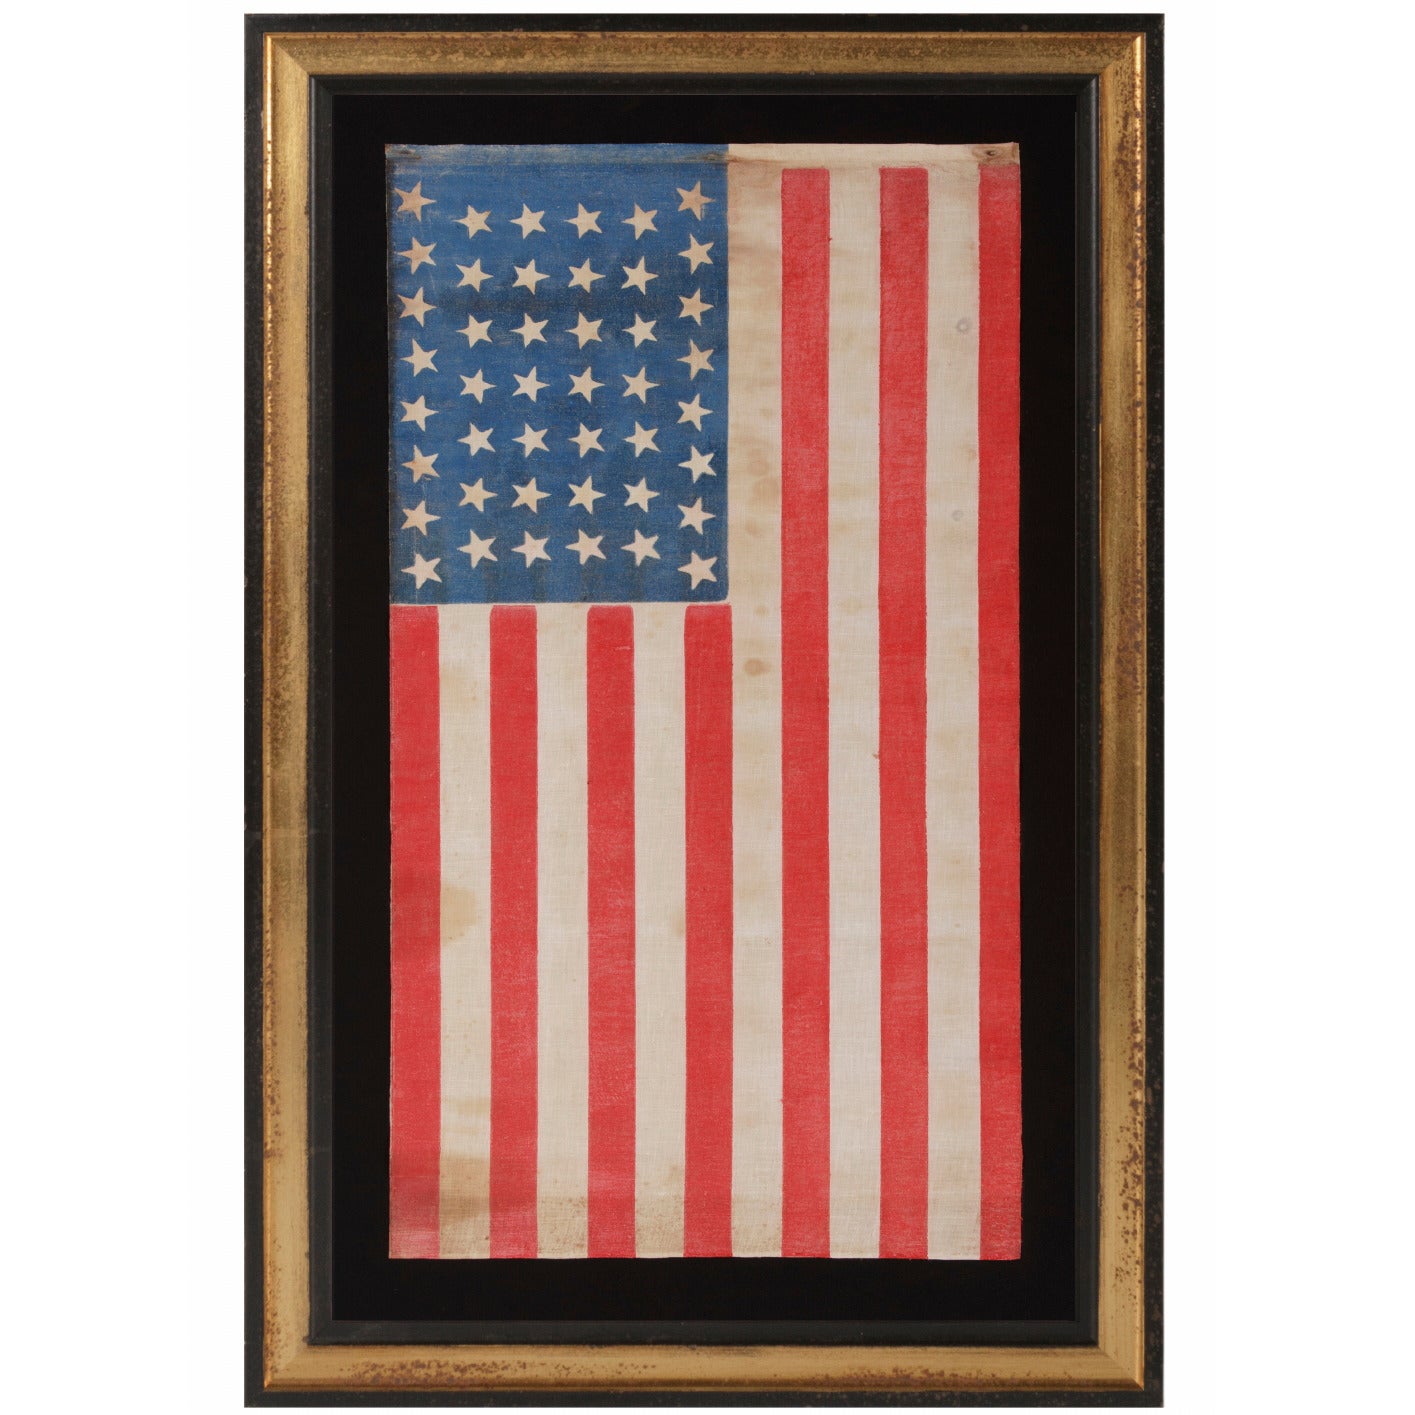 44 Star Flag with Dancing or Tumbling Stars in an Hourglass Formation